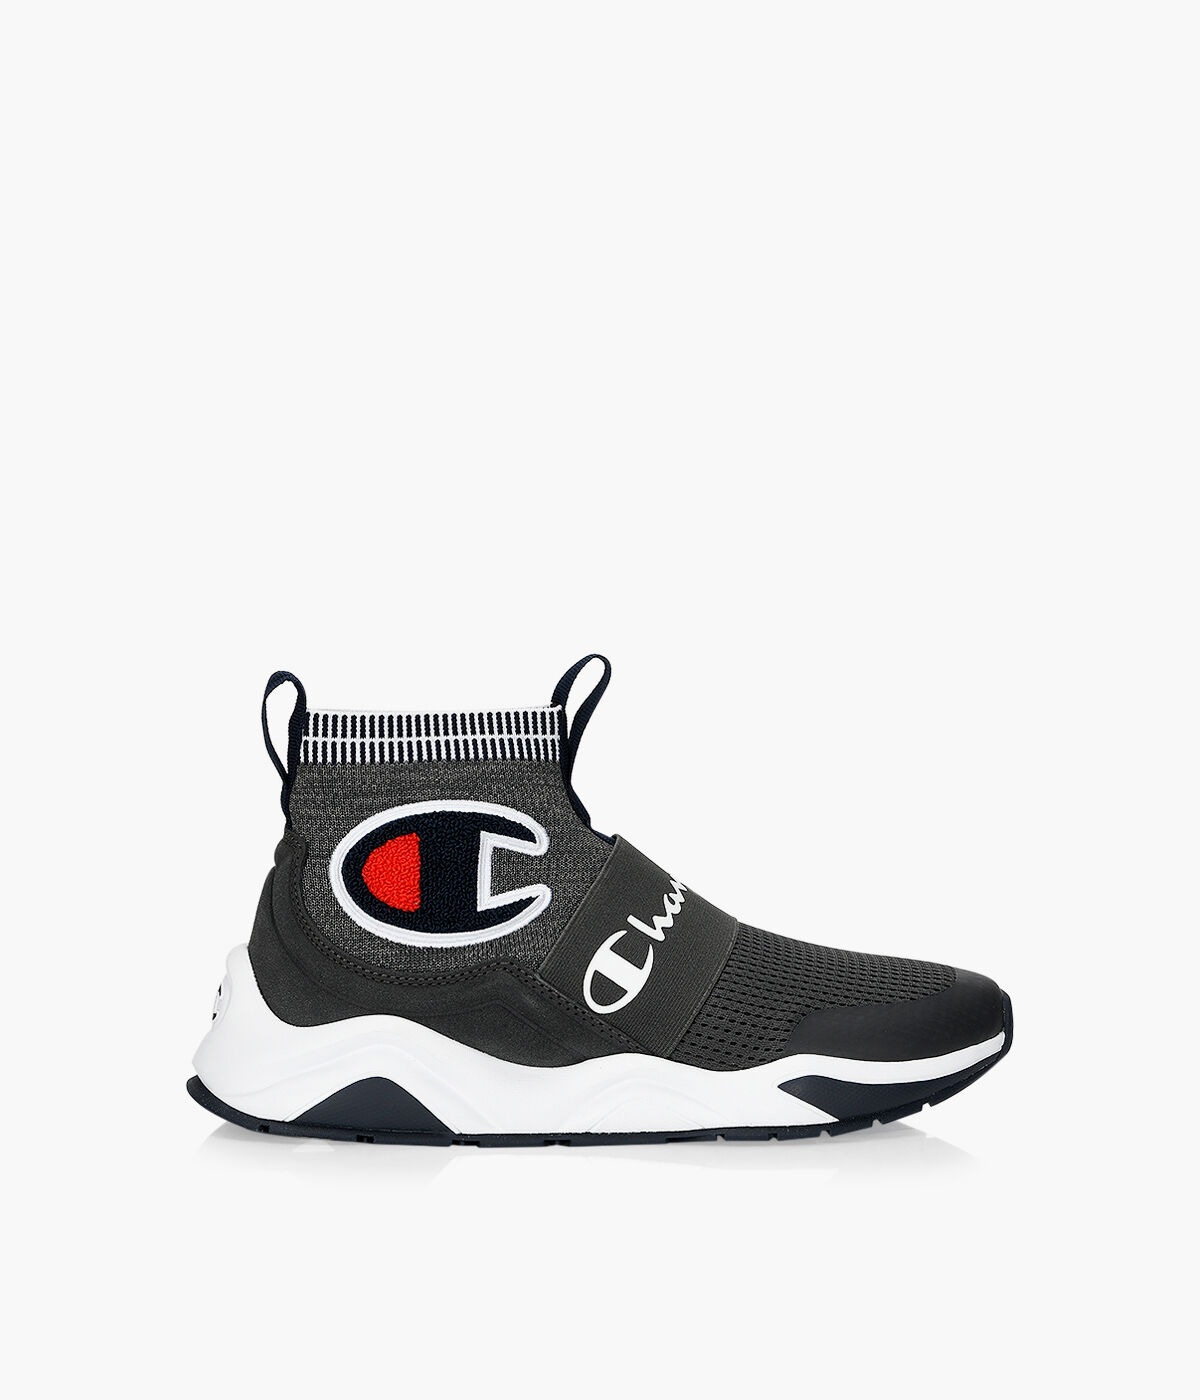 champion rally shoes